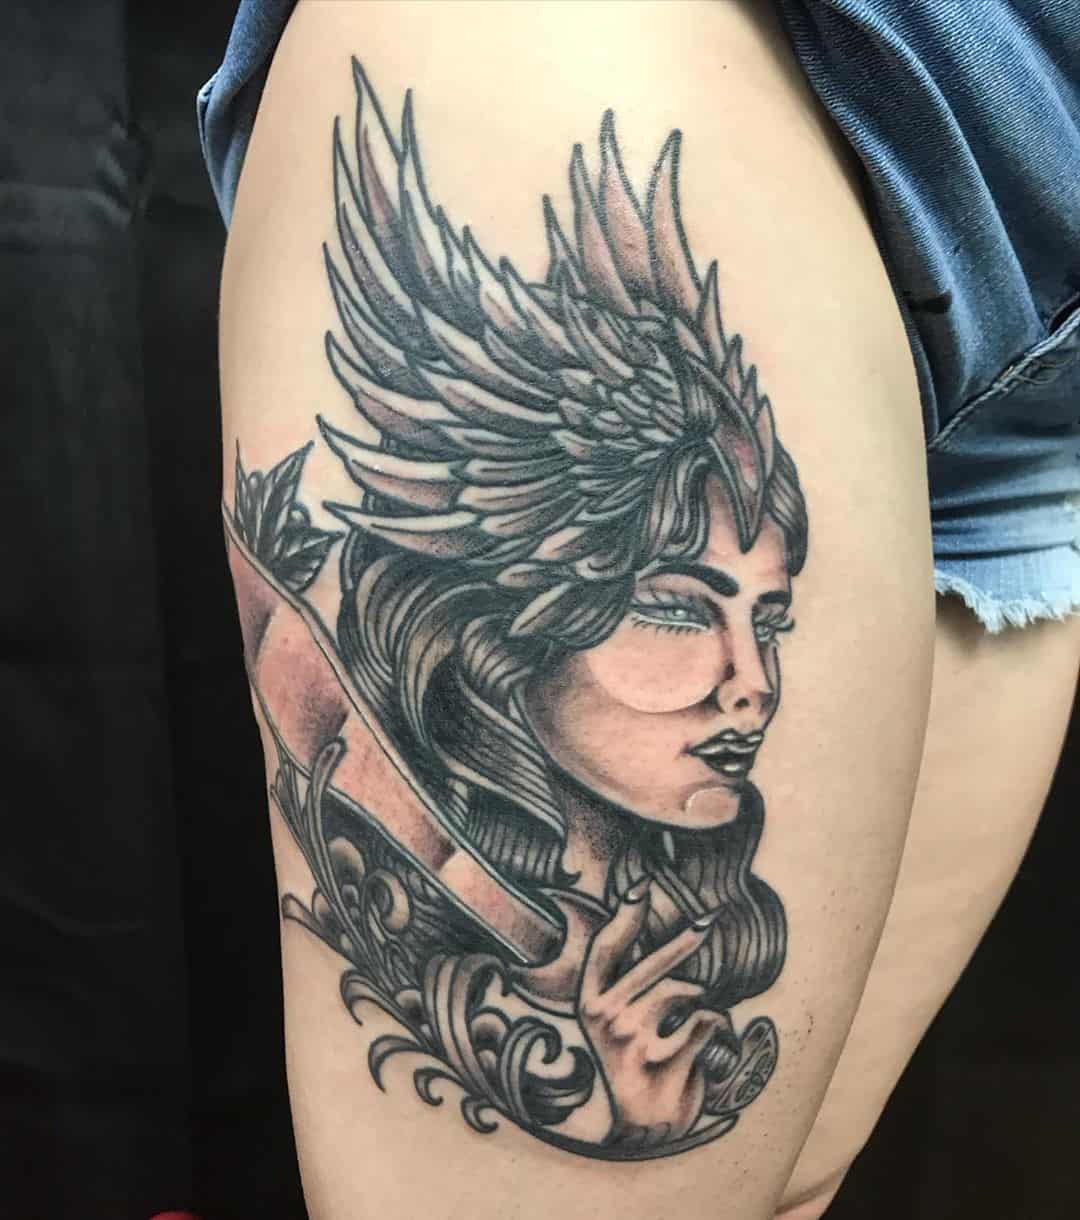 Meaning of the Valkyrie Tattoo | BlendUp